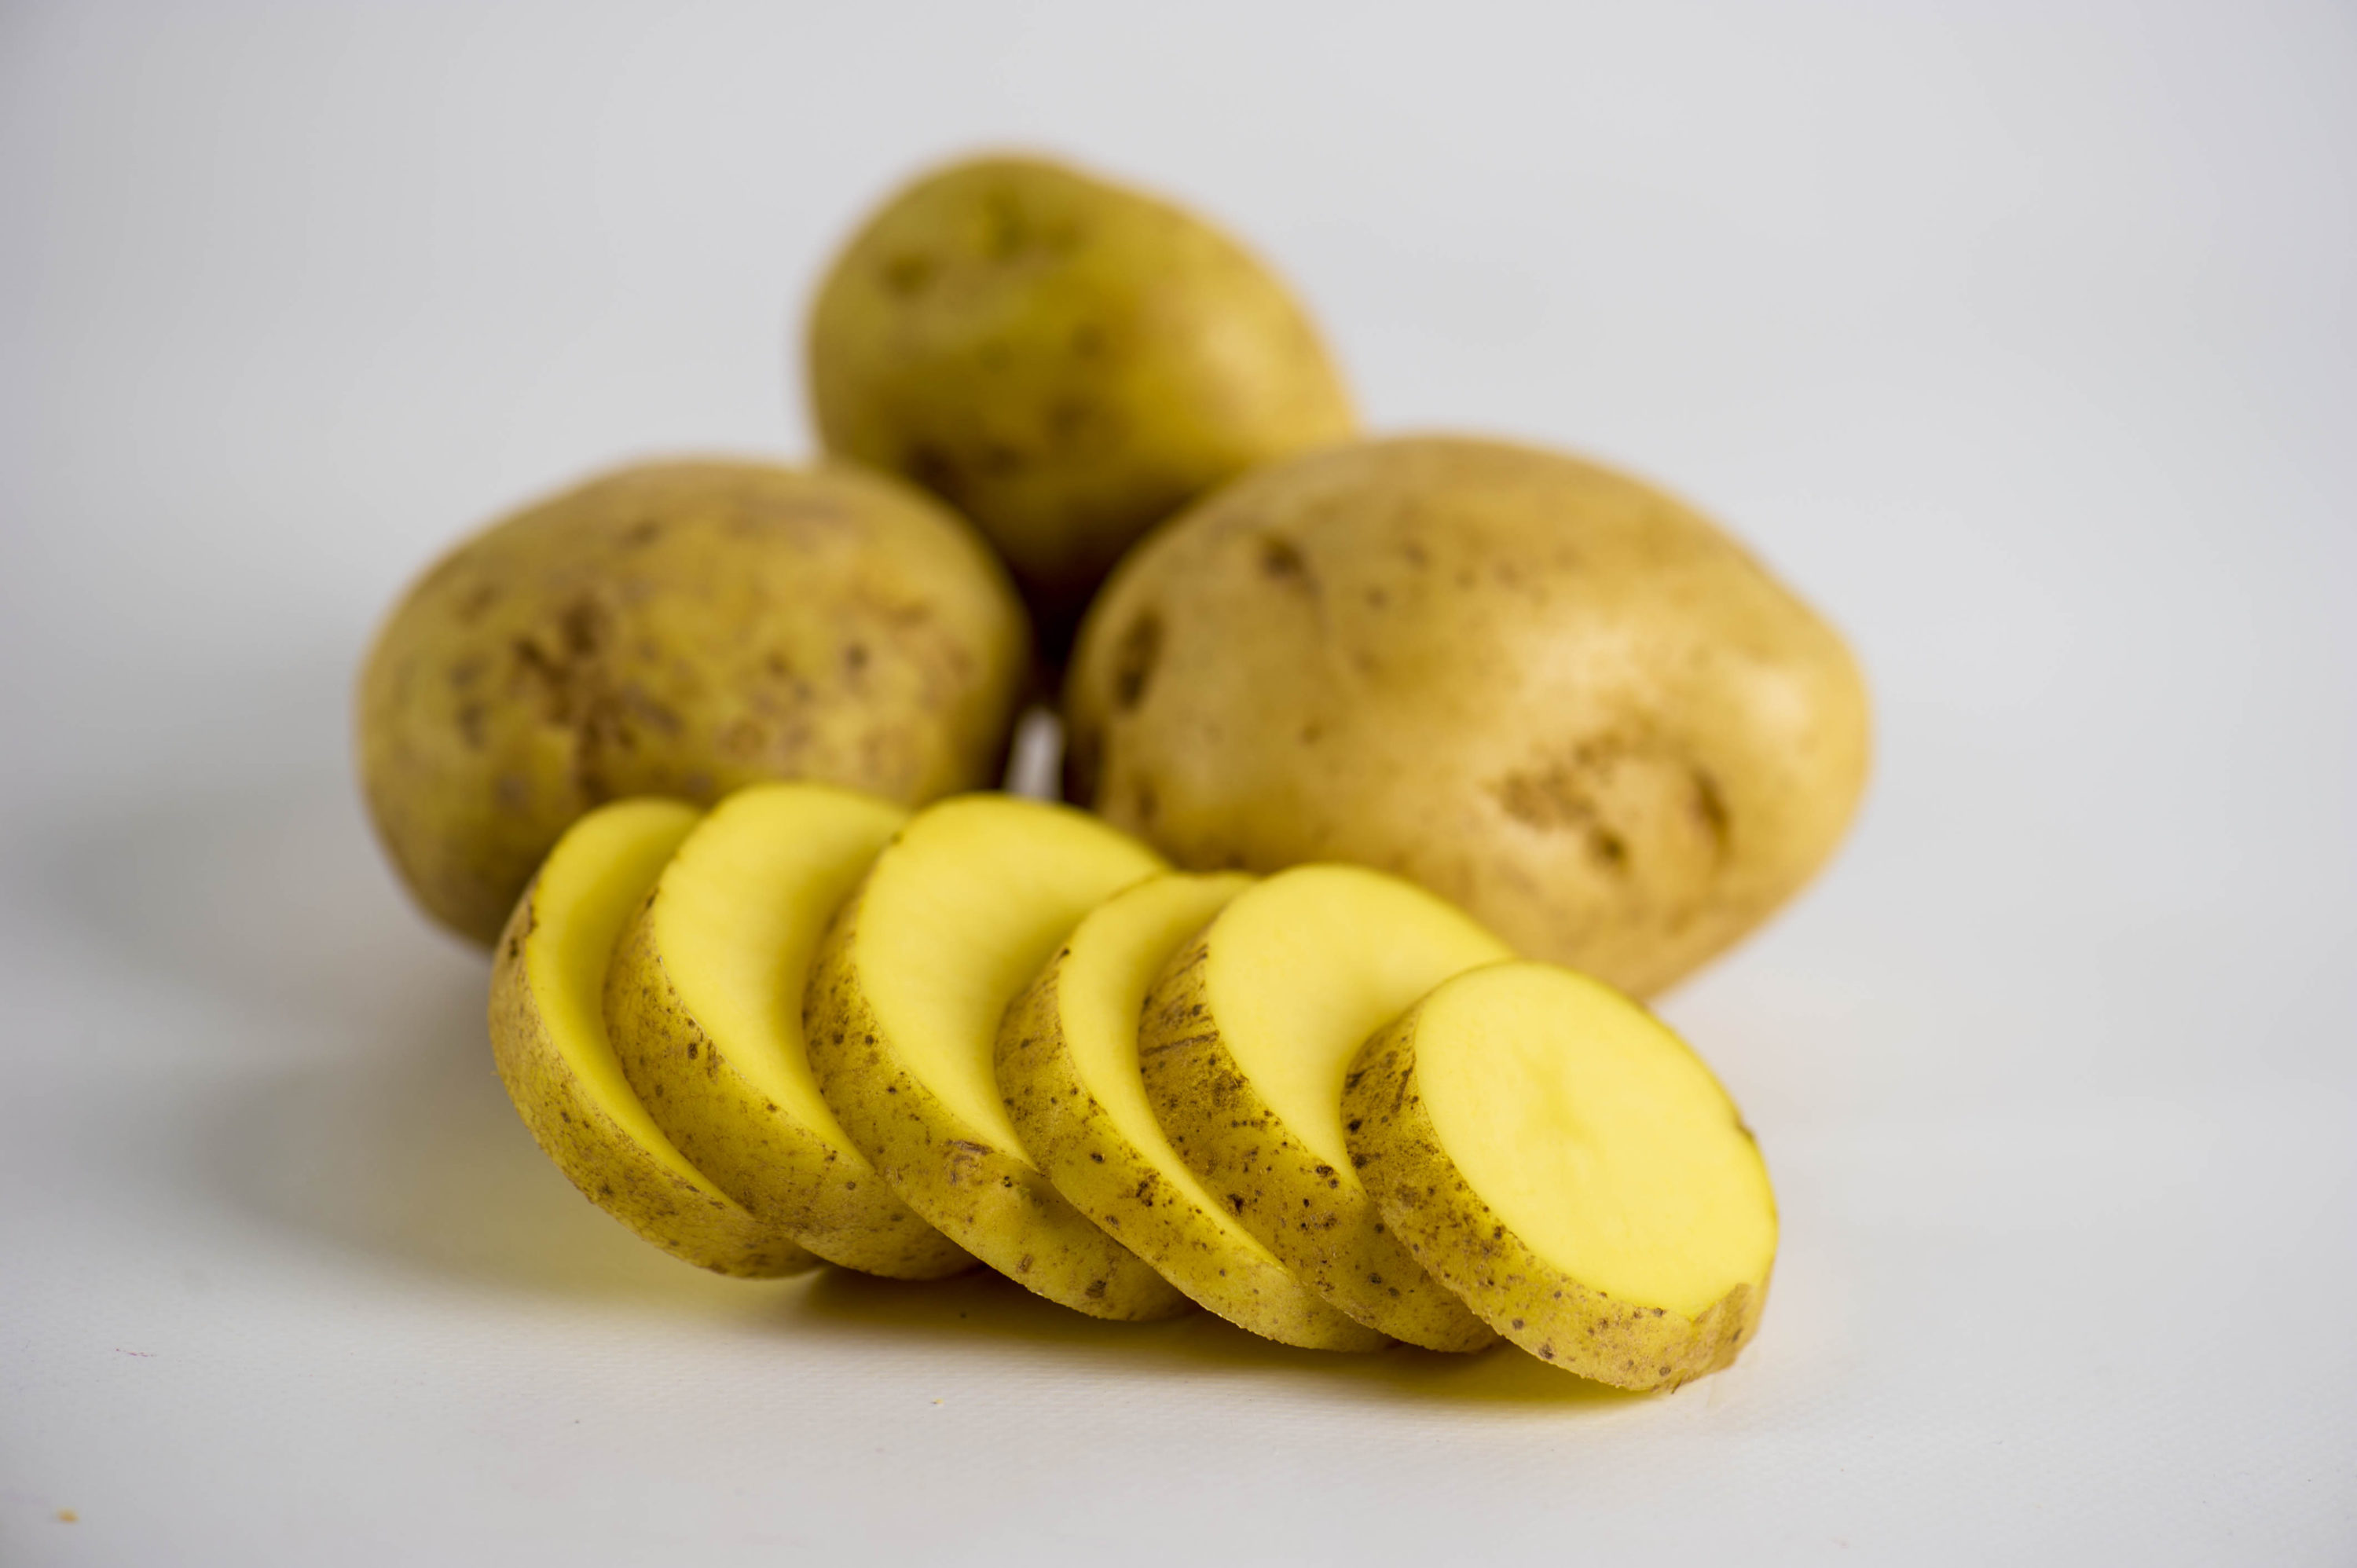 Potatoes are one the world's most popular foods. Agriculturists in 17th century Europe found potatoes were easier to grow and sustain than many other crops and, when coupled with their nutritional value, potatoes gained popularity, particularly among the working class in Ireland.